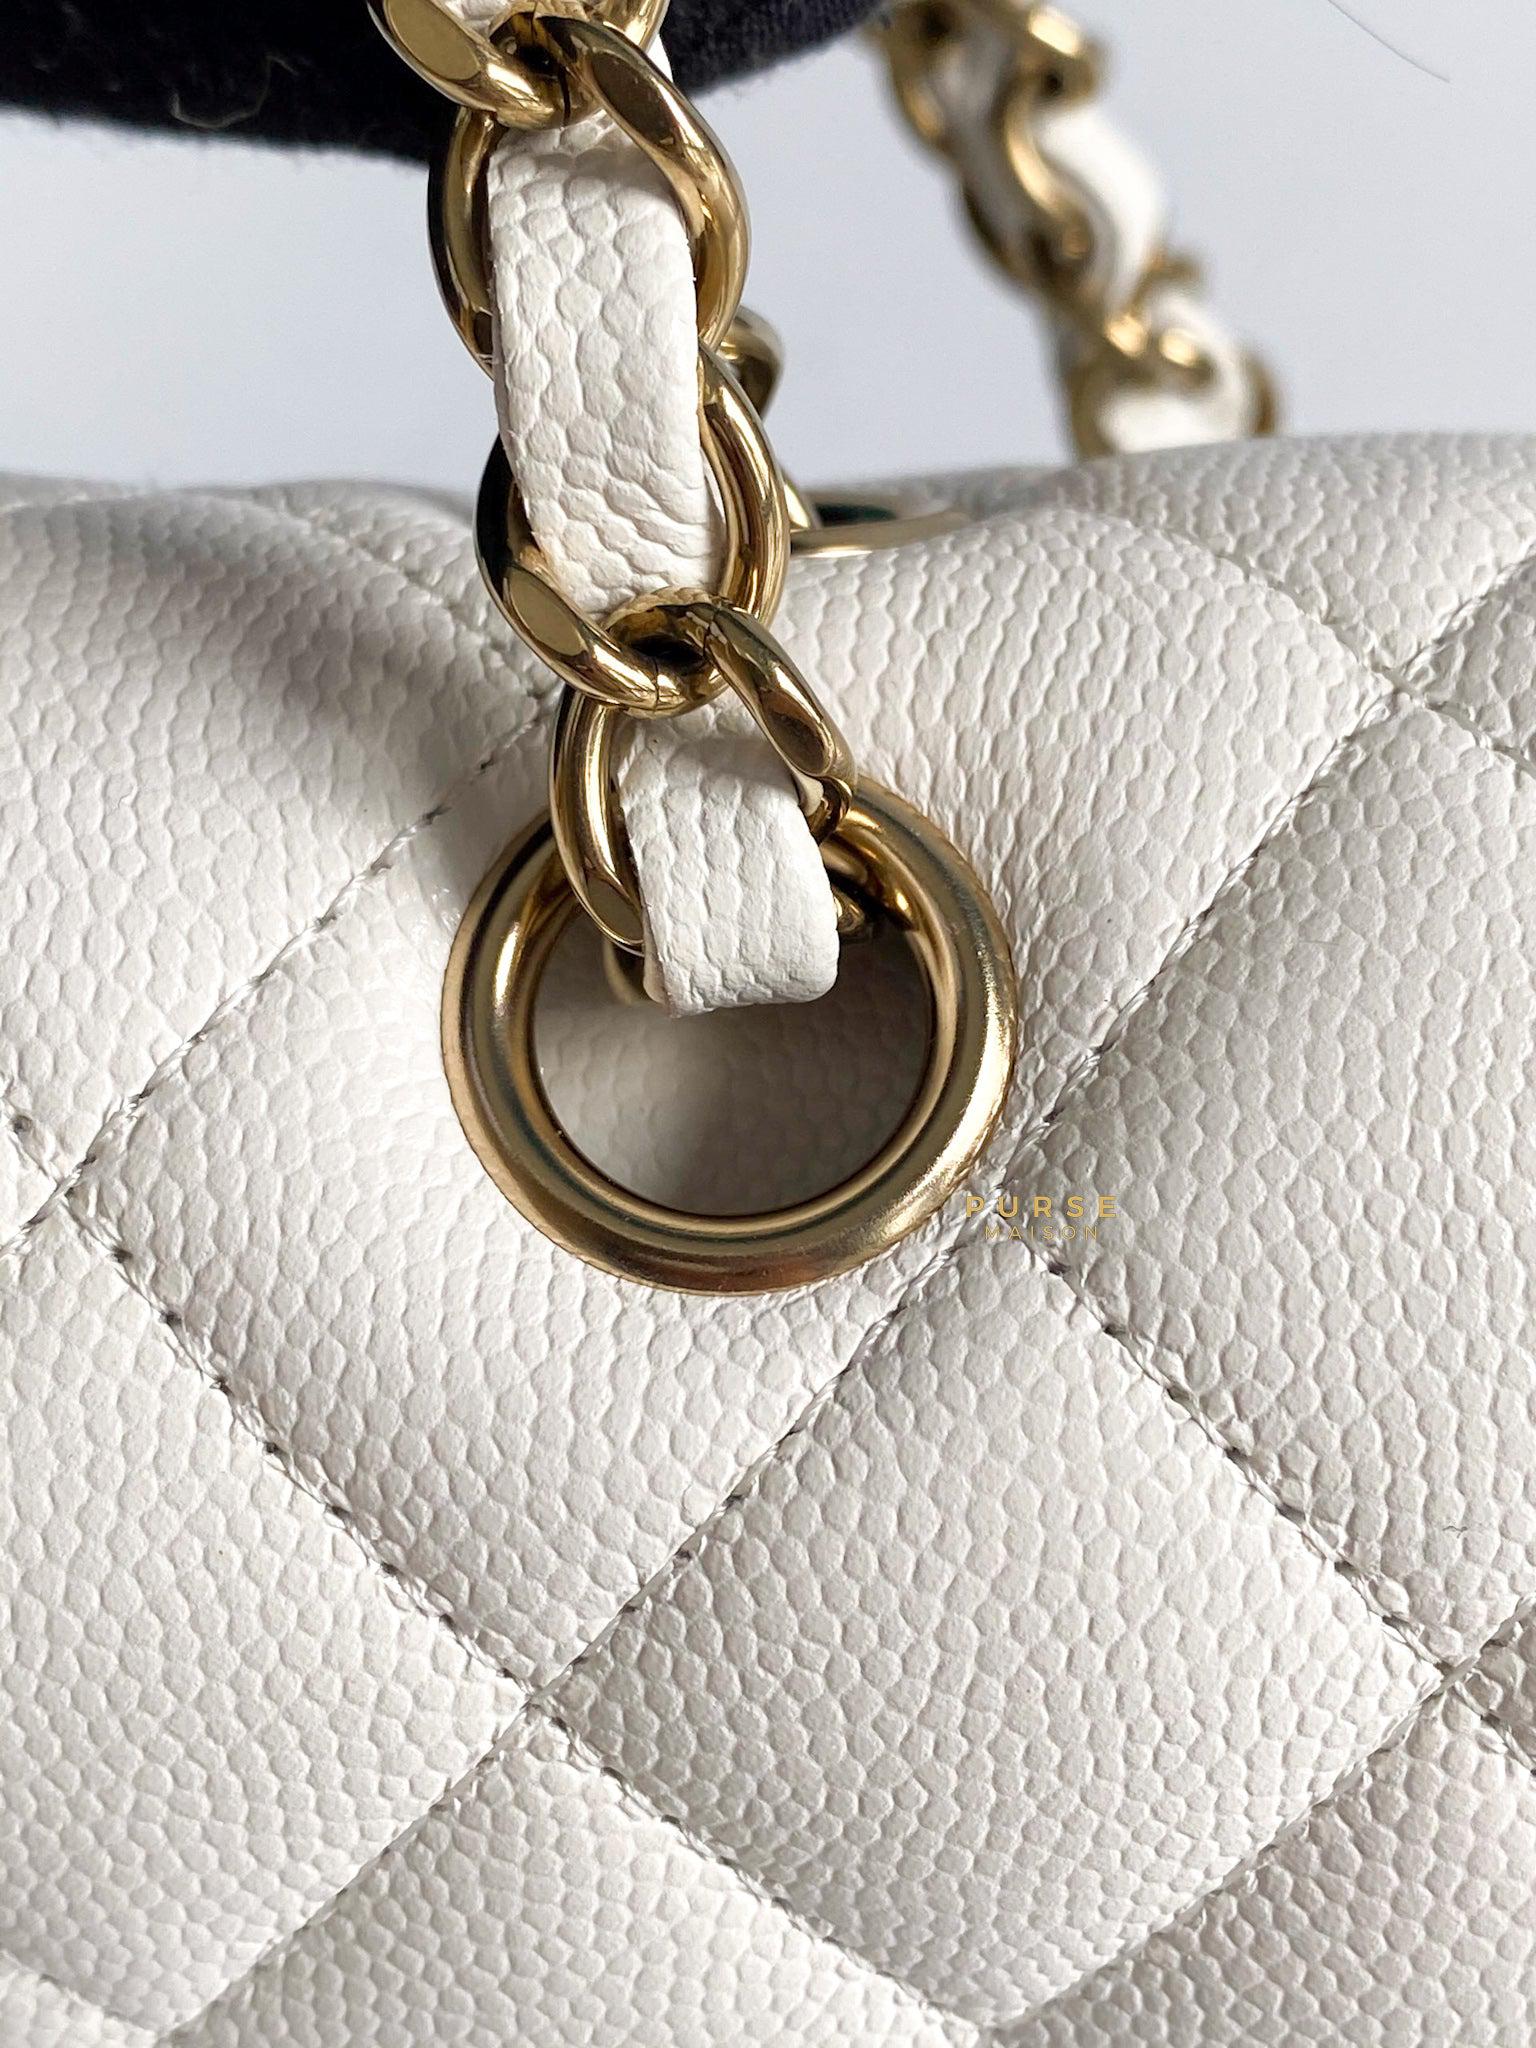 Chanel Medium Classic Double Flap 23C White Caviar Leather and Light Gold Hardware (Microchip)